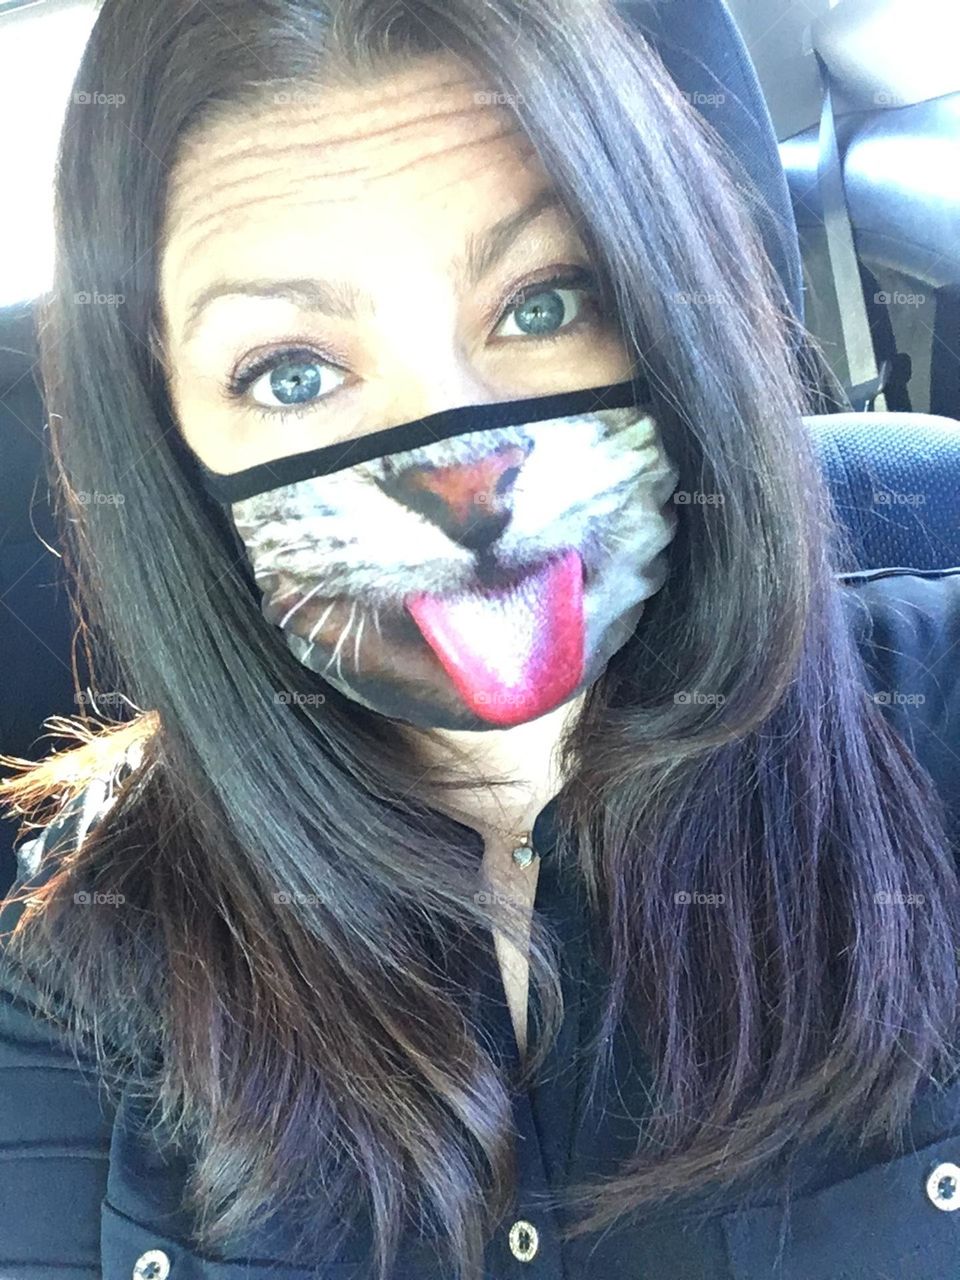 Selfie with a cat mask